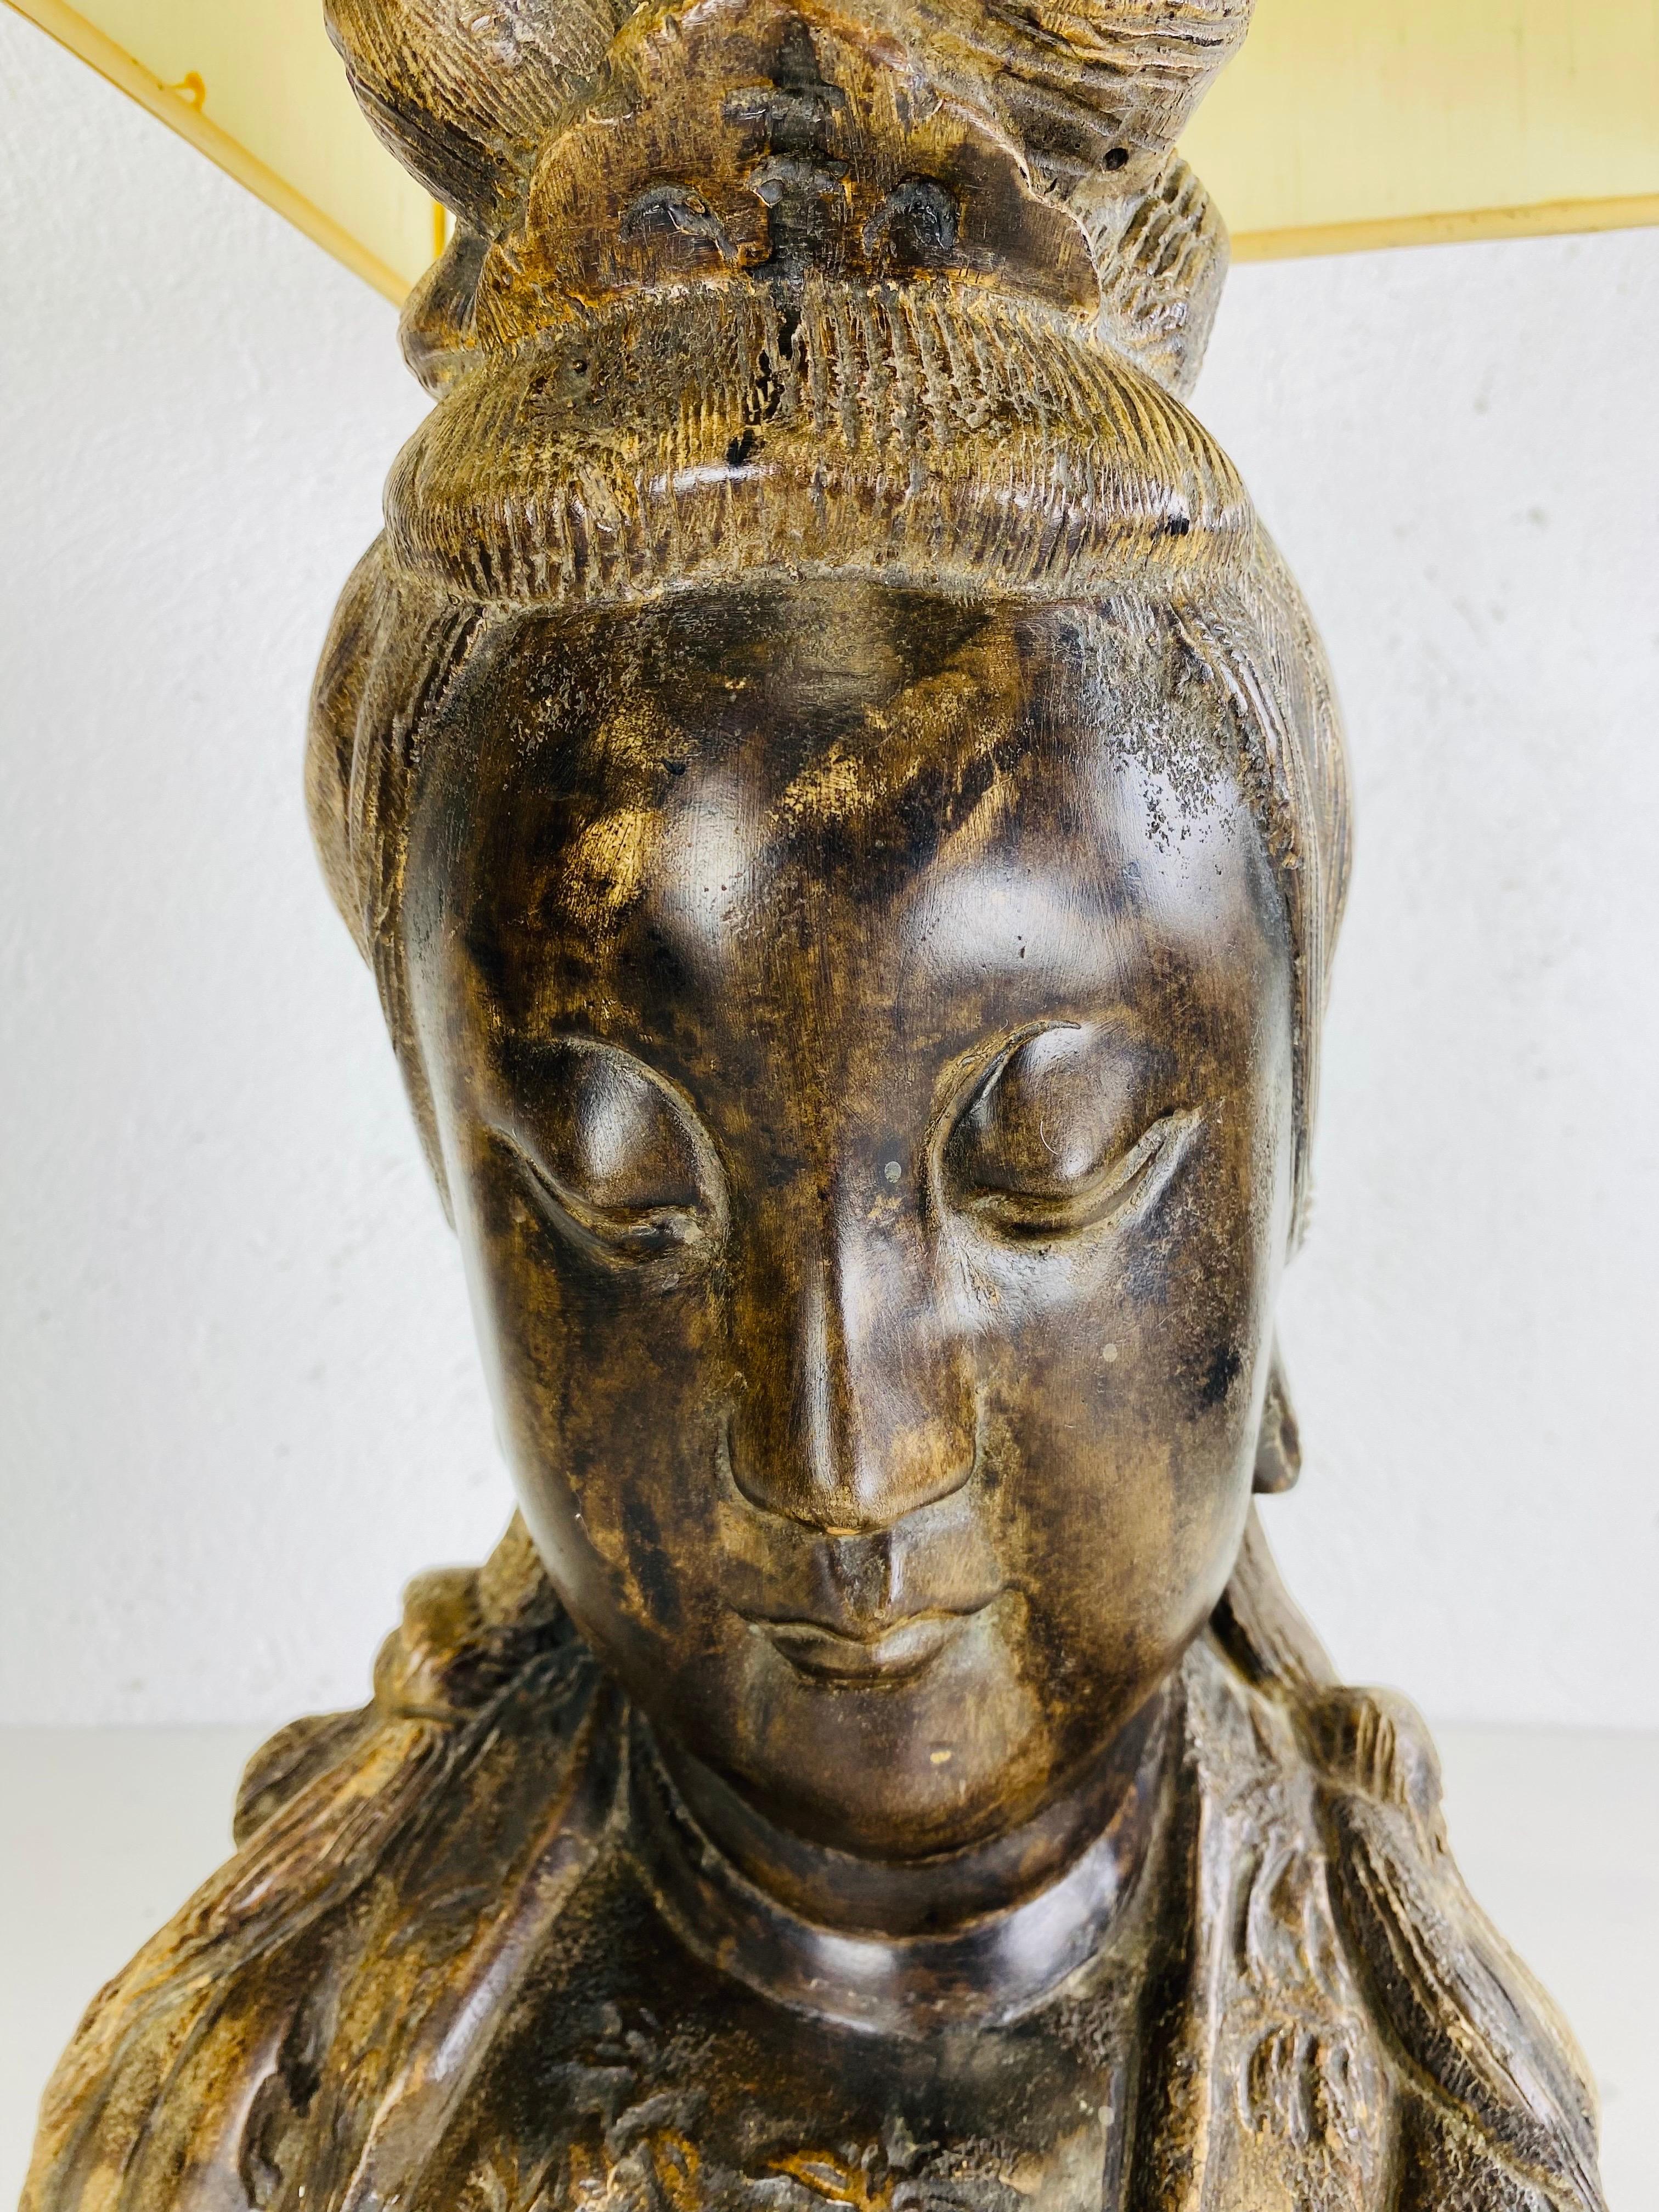 This is an oversized mid-century vintage Asian style lamp. This lamp is a bust of Guan yin and features is original large silk shade. The bust has a patinated bronze finish to the surface and is mounted on a black base. The lamp is in the style of